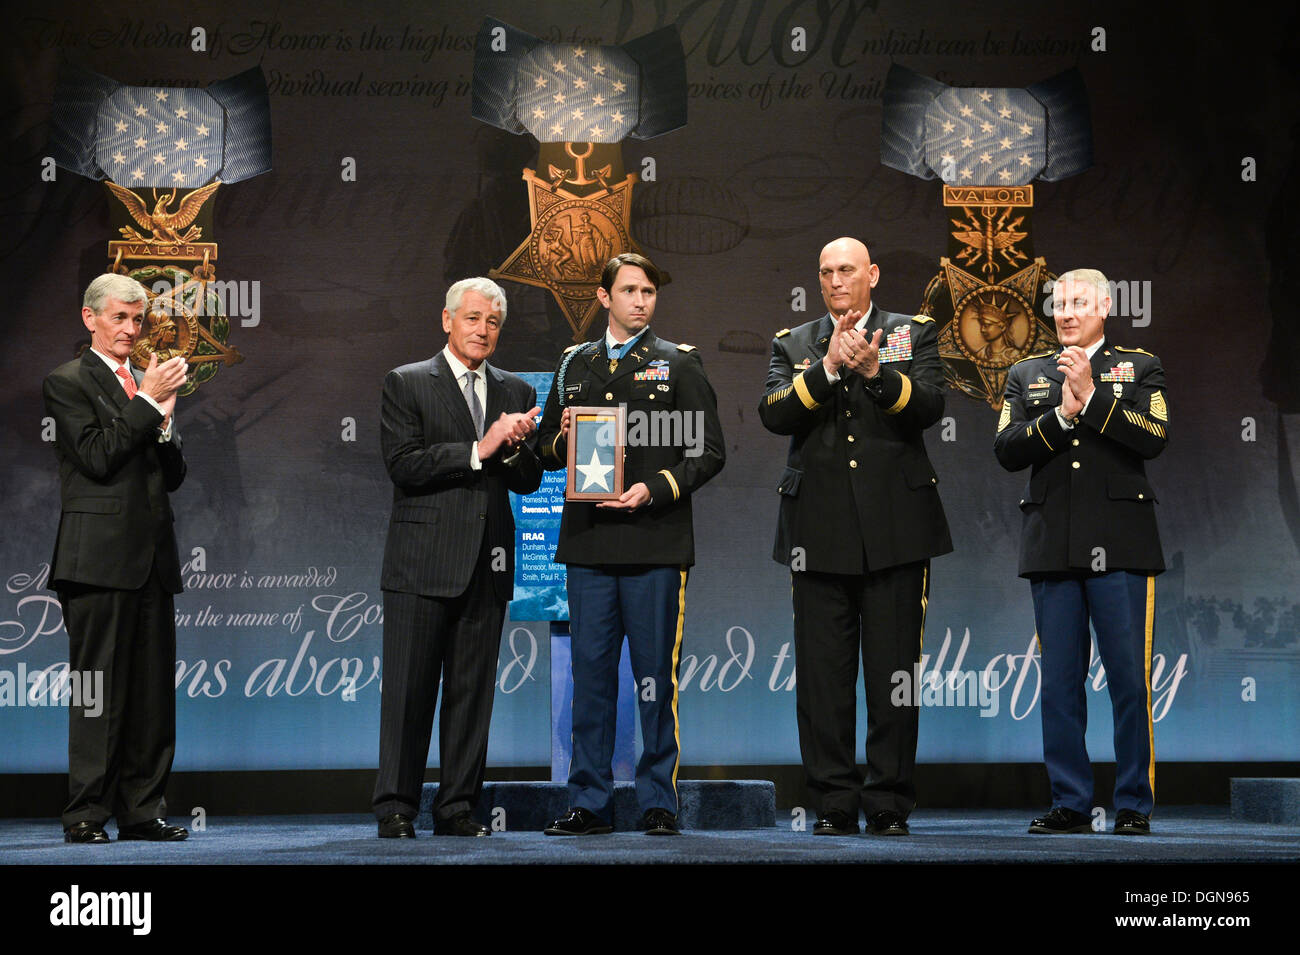 From left to right, Secretary of Defense Chuck Hagel, Secretary of the Army John McHugh, Former U.S. Army Capt. William D. Swenson, Chief of Staff of the Army Gen. Raymond T. Odierno, Sgt. Maj. of the Army Raymond F. Chandler III with the Medal of Honor f Stock Photo